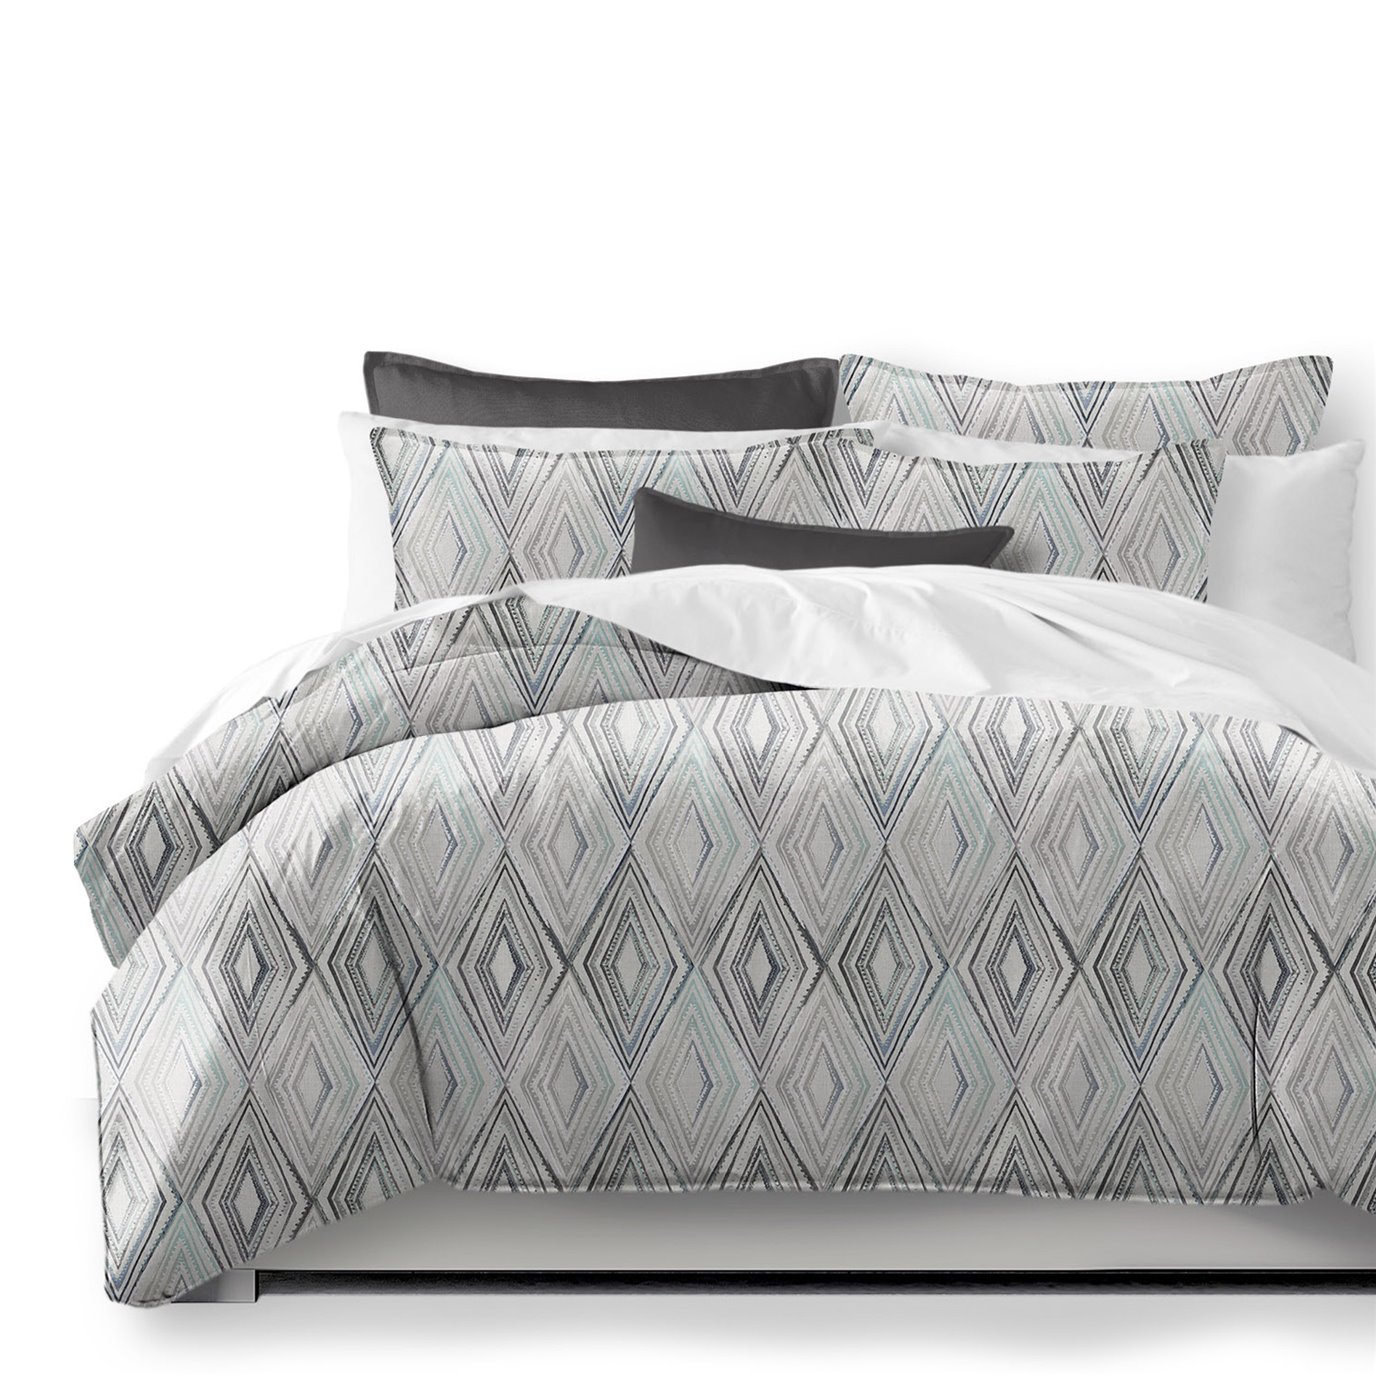 Sloane Seabreeze/Ivory Comforter and Pillow Sham(s) Set - Size Twin